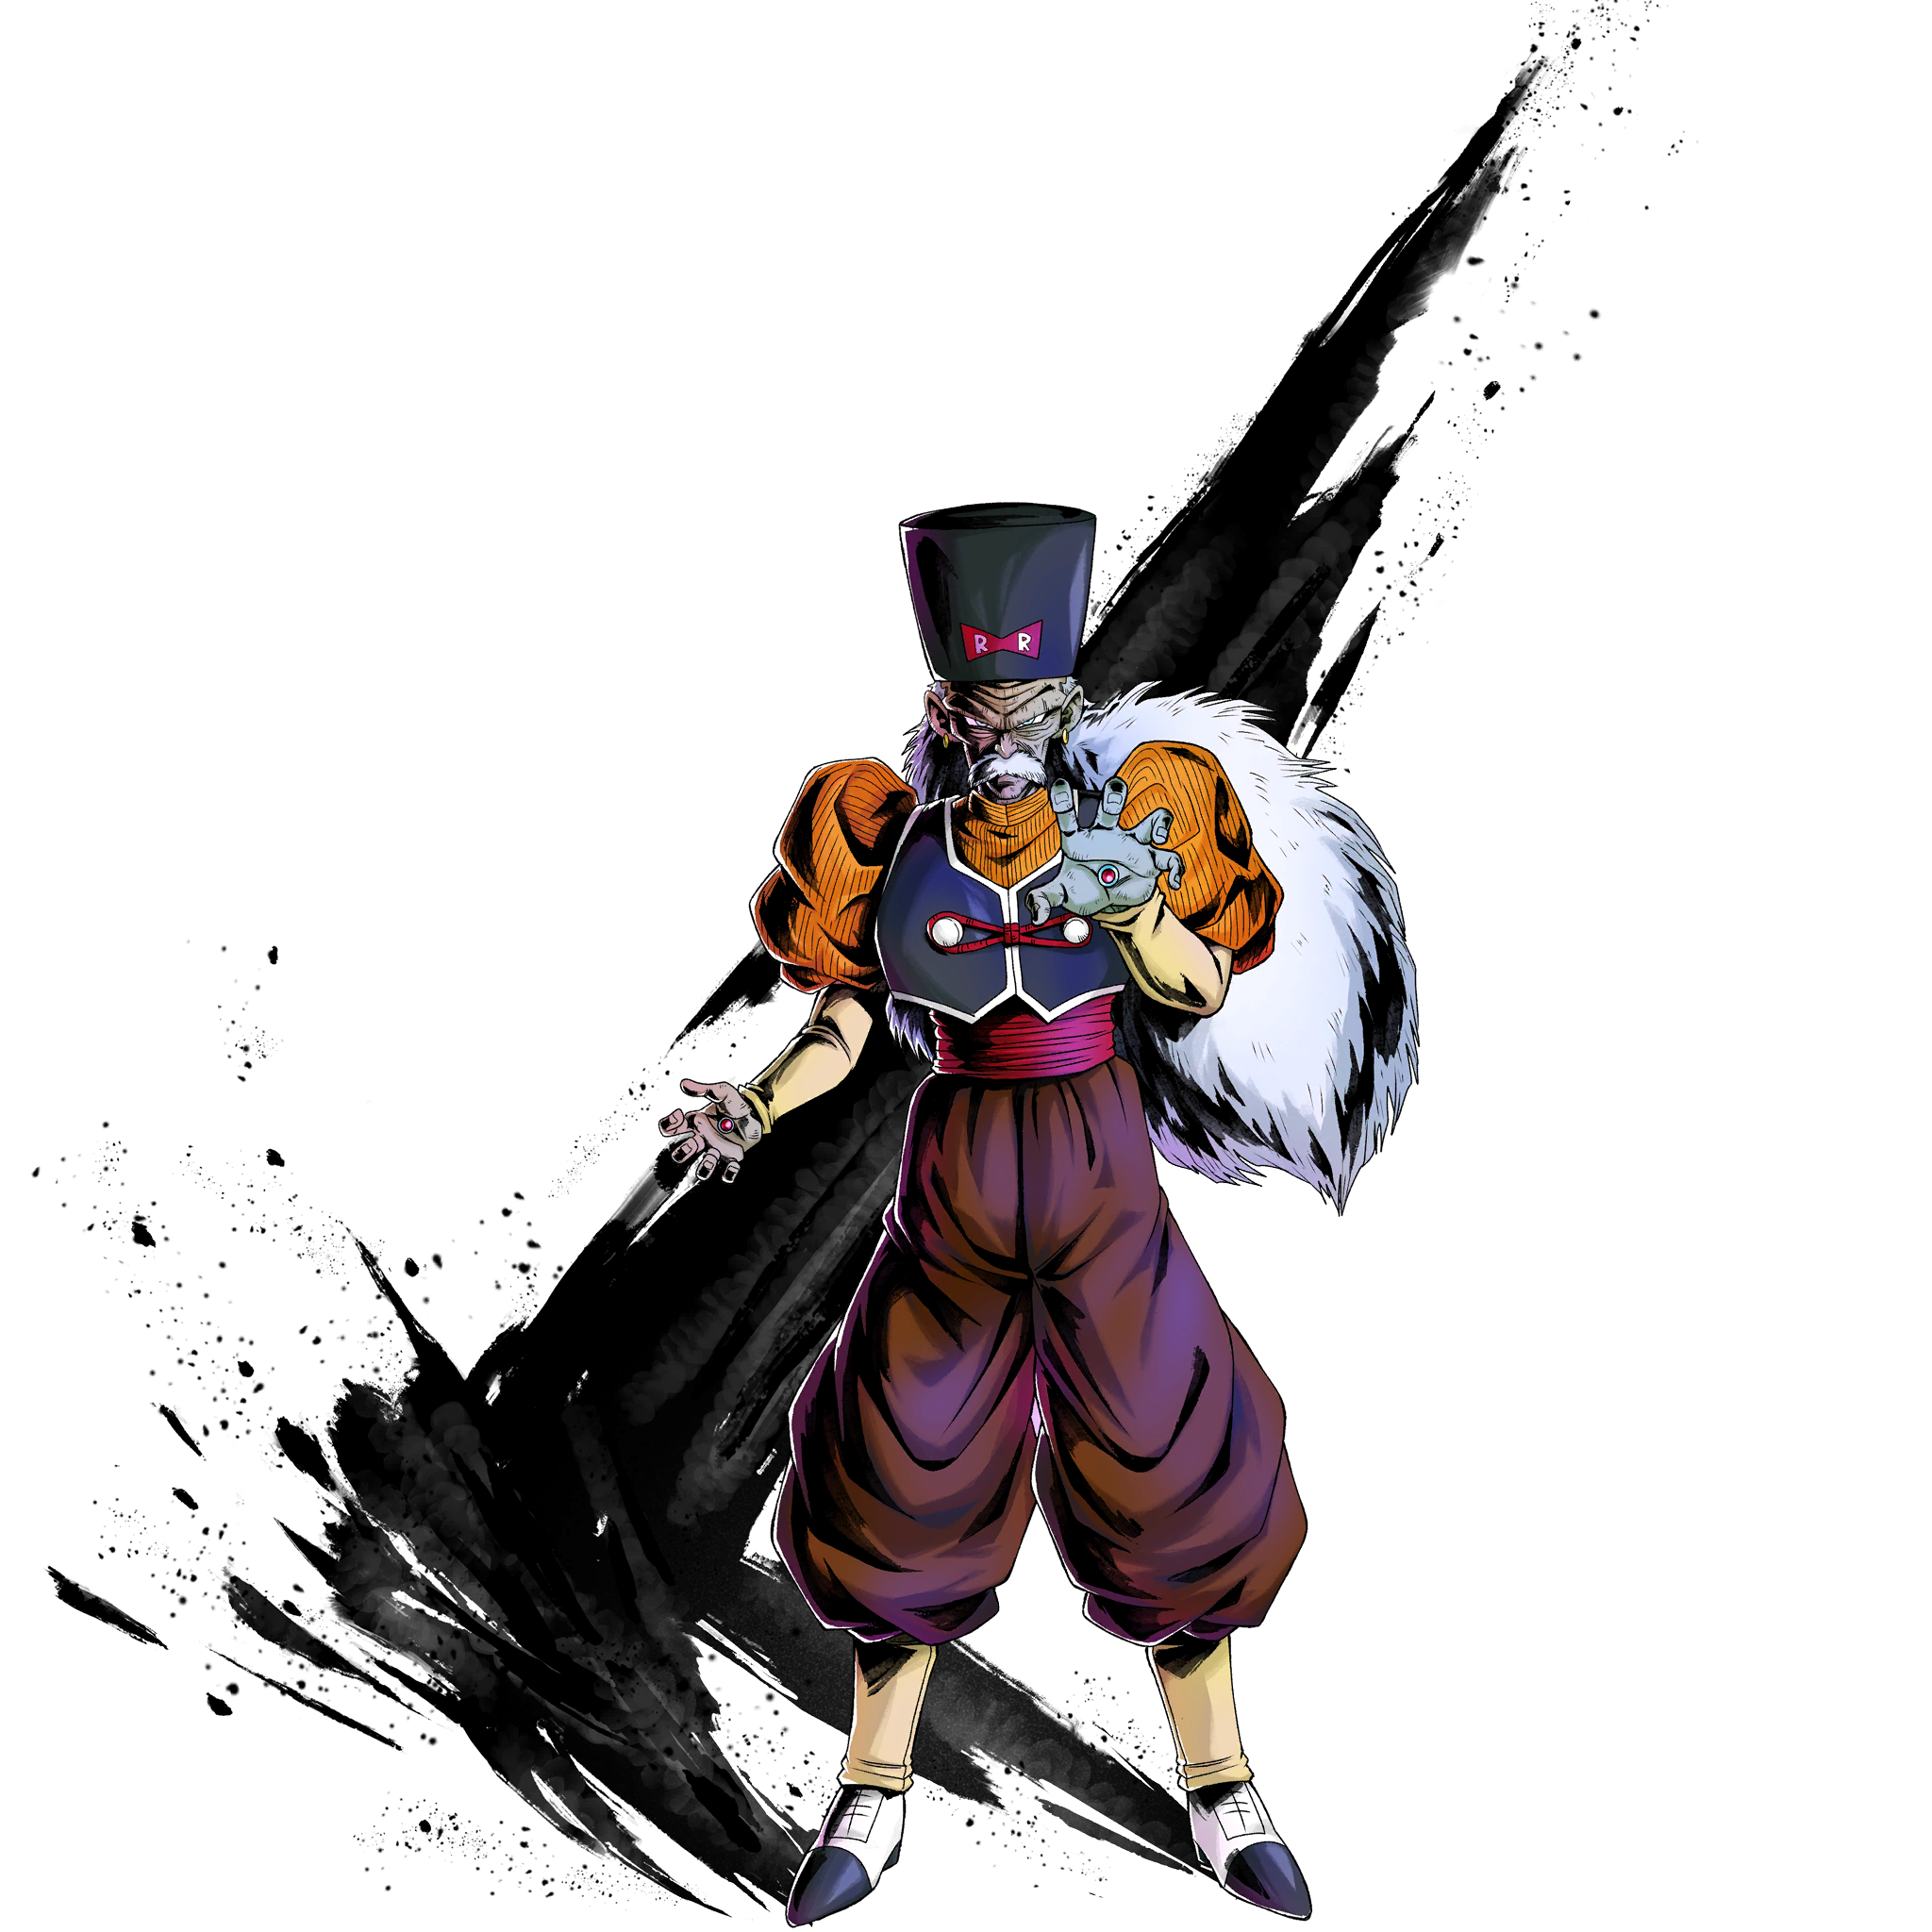 Dragonball Legends - Android 19 and 20 for XPS by o-DV89-o on DeviantArt